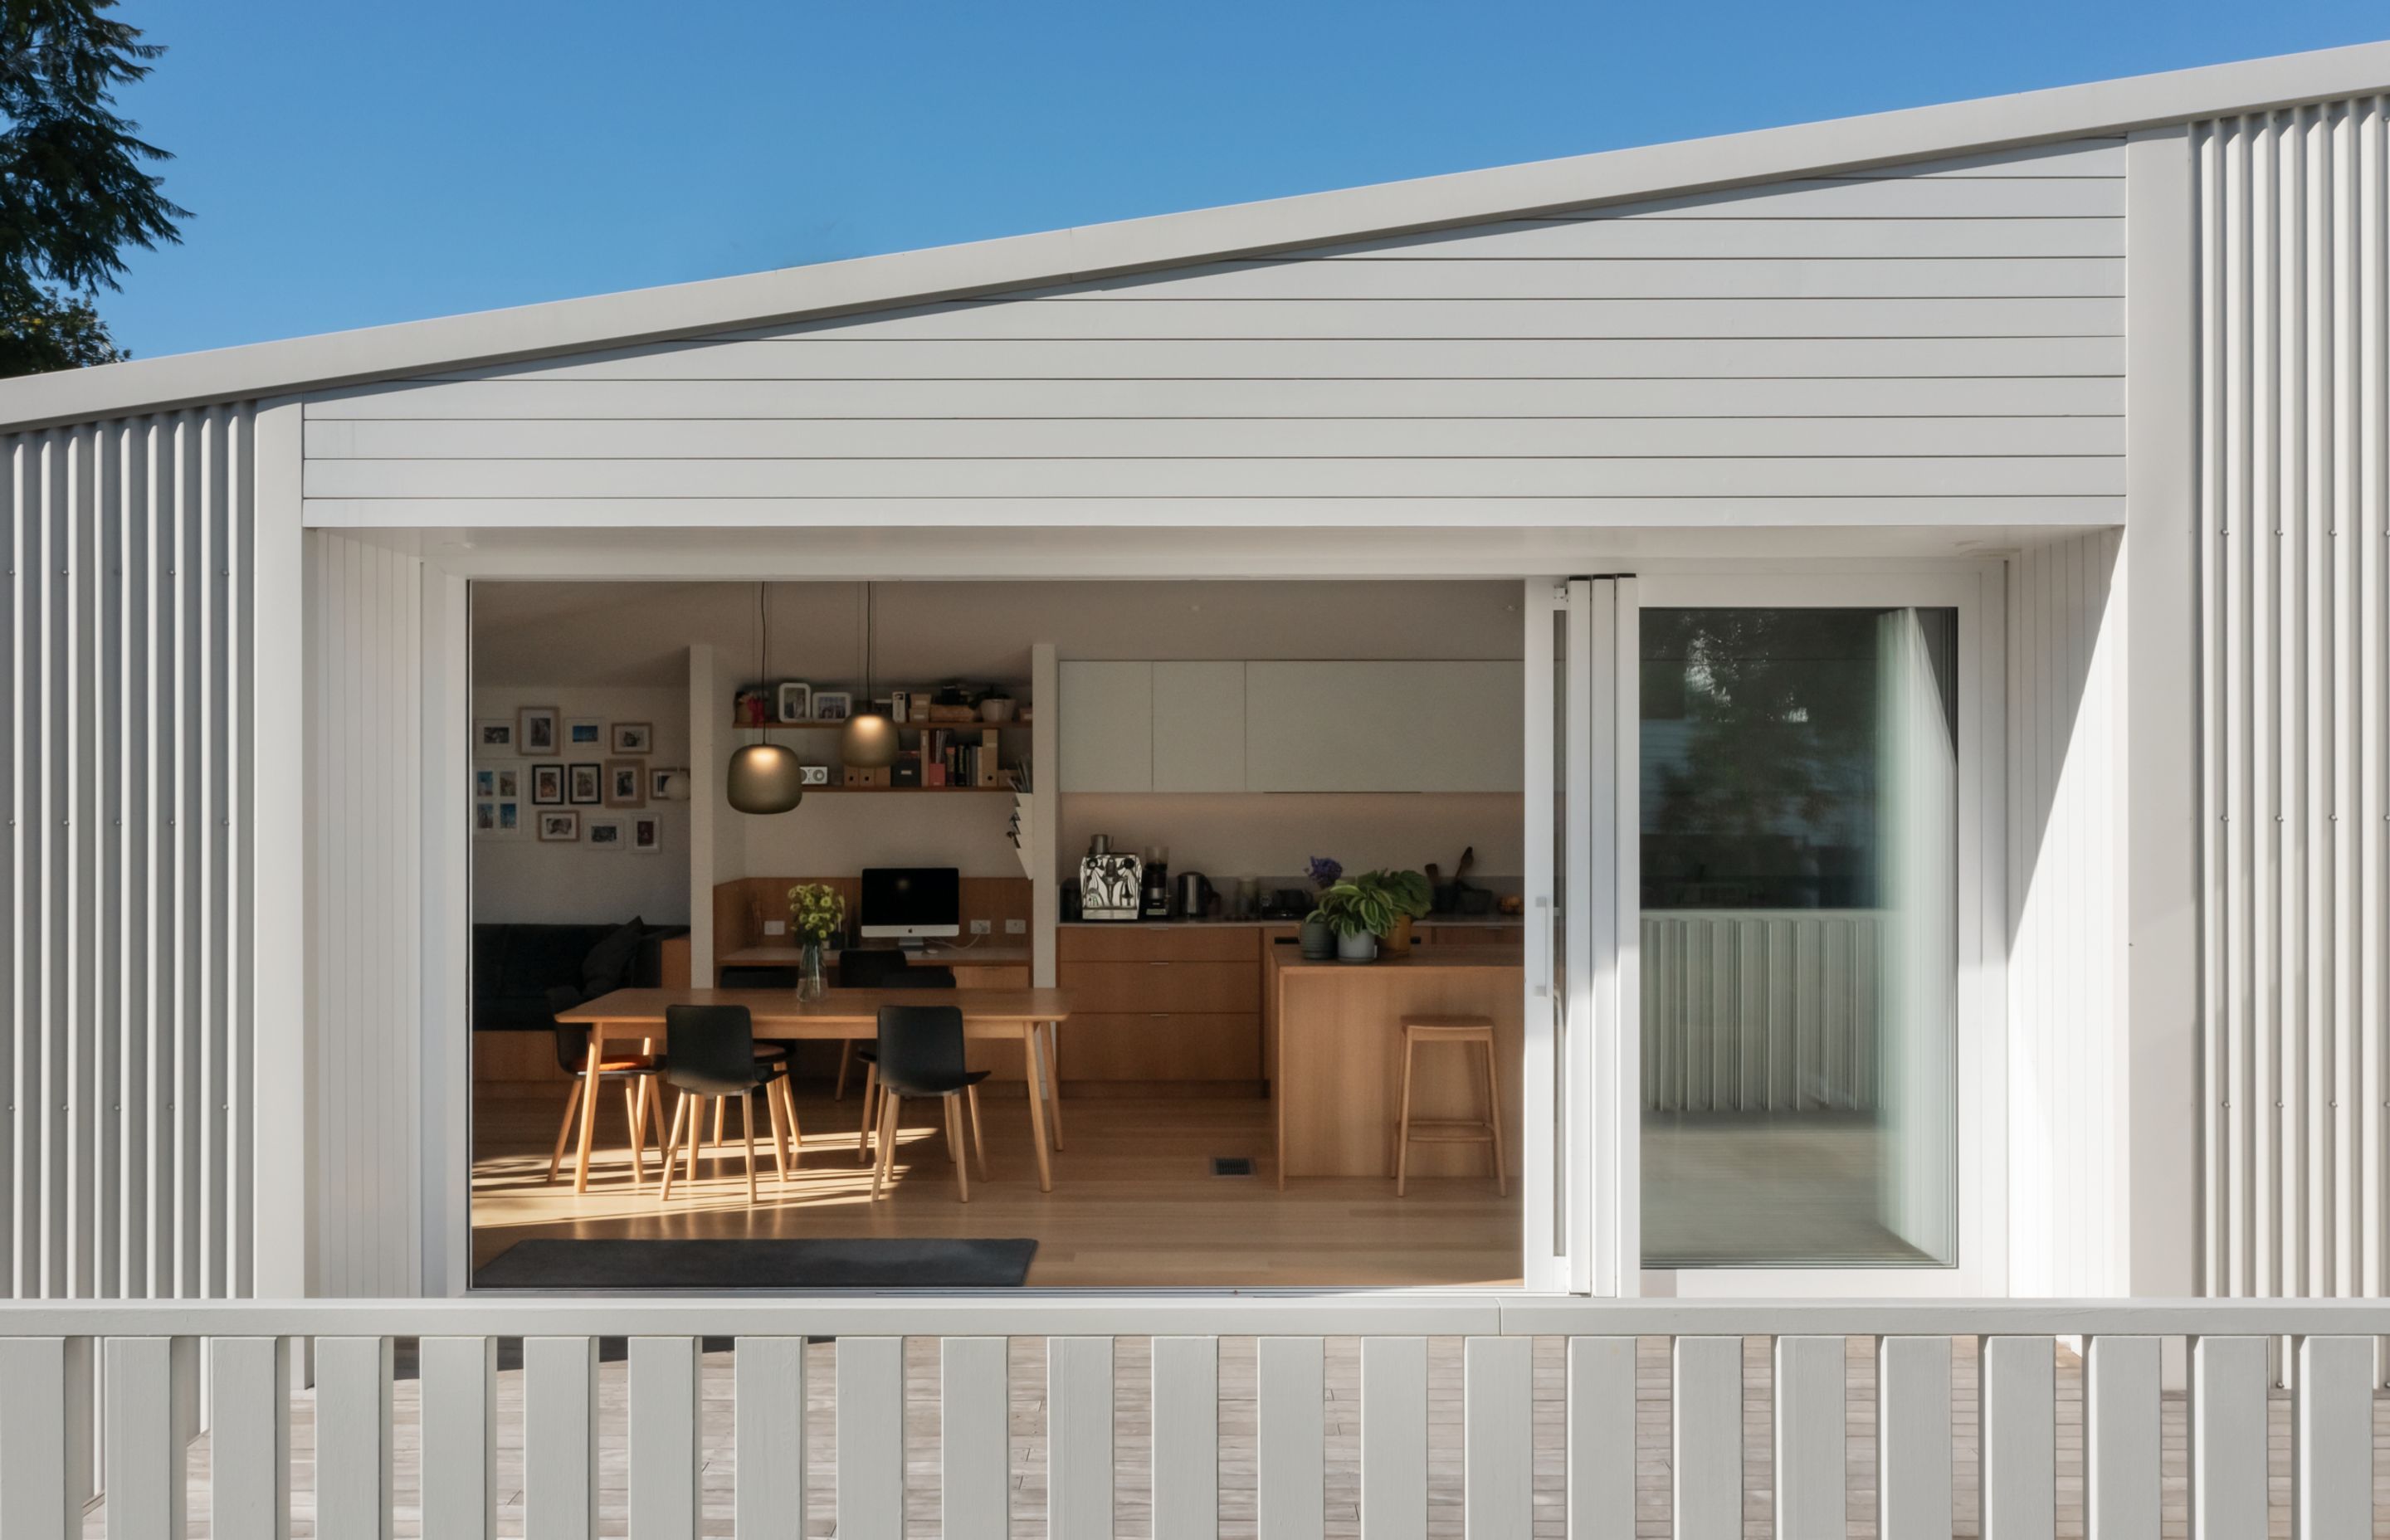 Installed alongside original 1920s weatherboards, COLORSTEEL cladding gives this Westmere bungalow a style upgrade.